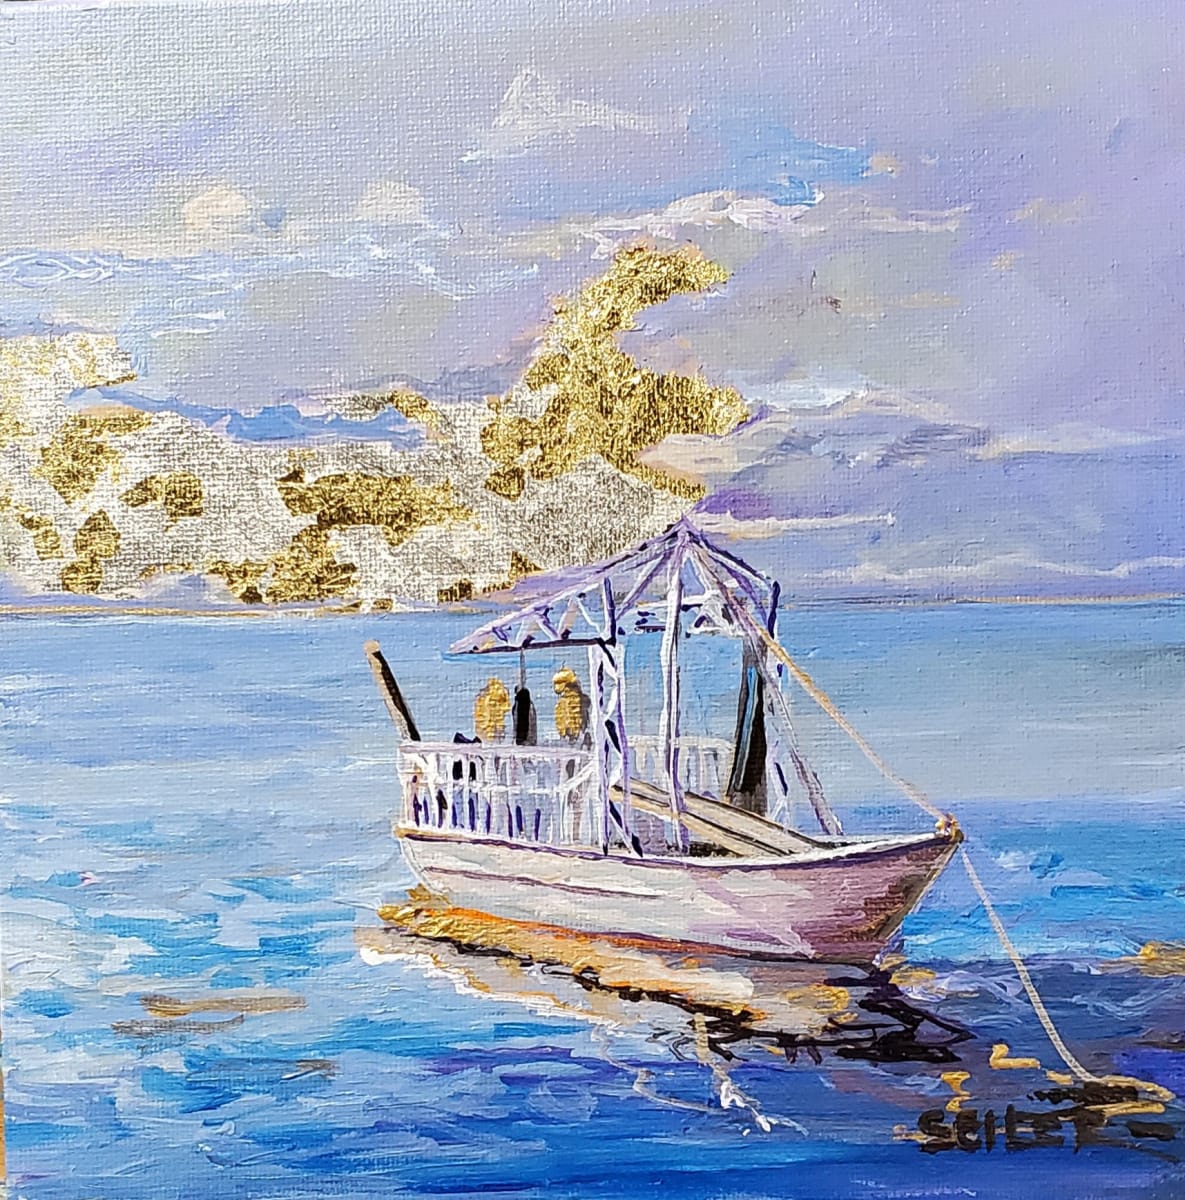 Gold Coast Oystermen by Jill Seiler  Image: Apalachicola oysters are the best.  Hard work. Acrylic with gold leaf 